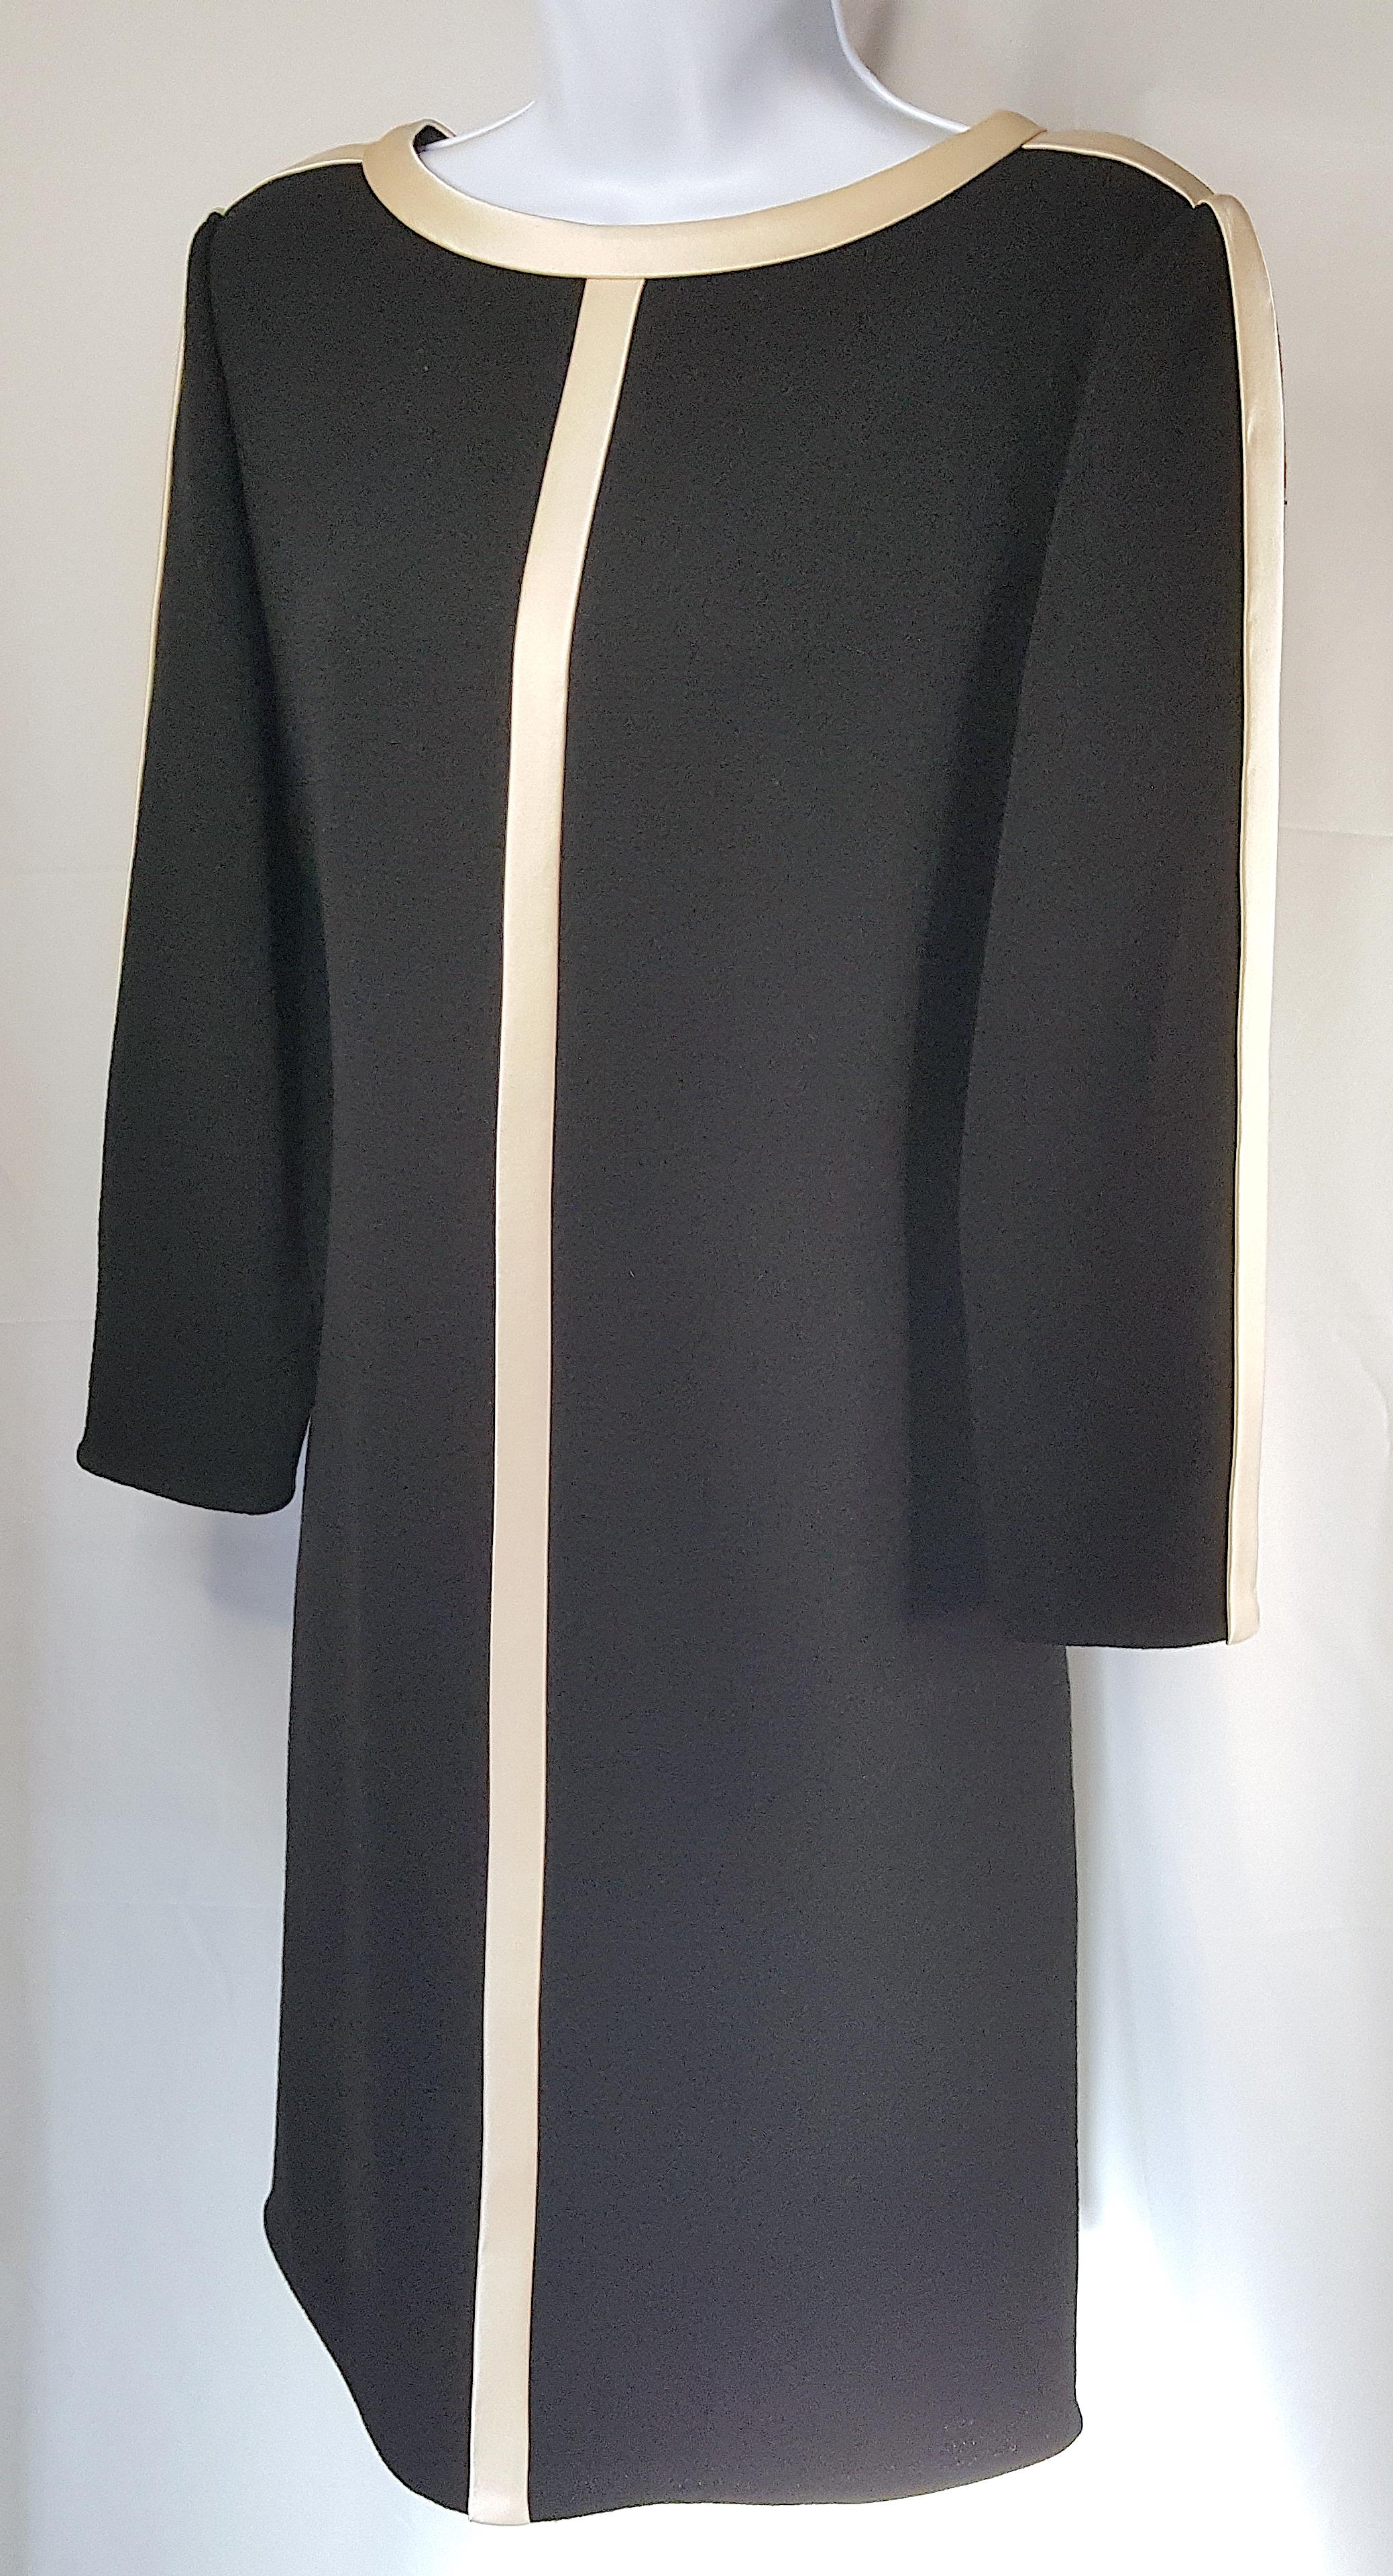 Around 1970 when he introduced his eponymous brand after becoming a leading couture fashion designer among New York City society, American Bill Blass created this sleek tuxedo-like ecru-satin-trimmed long-sleeve black wool crepe shift dress. The